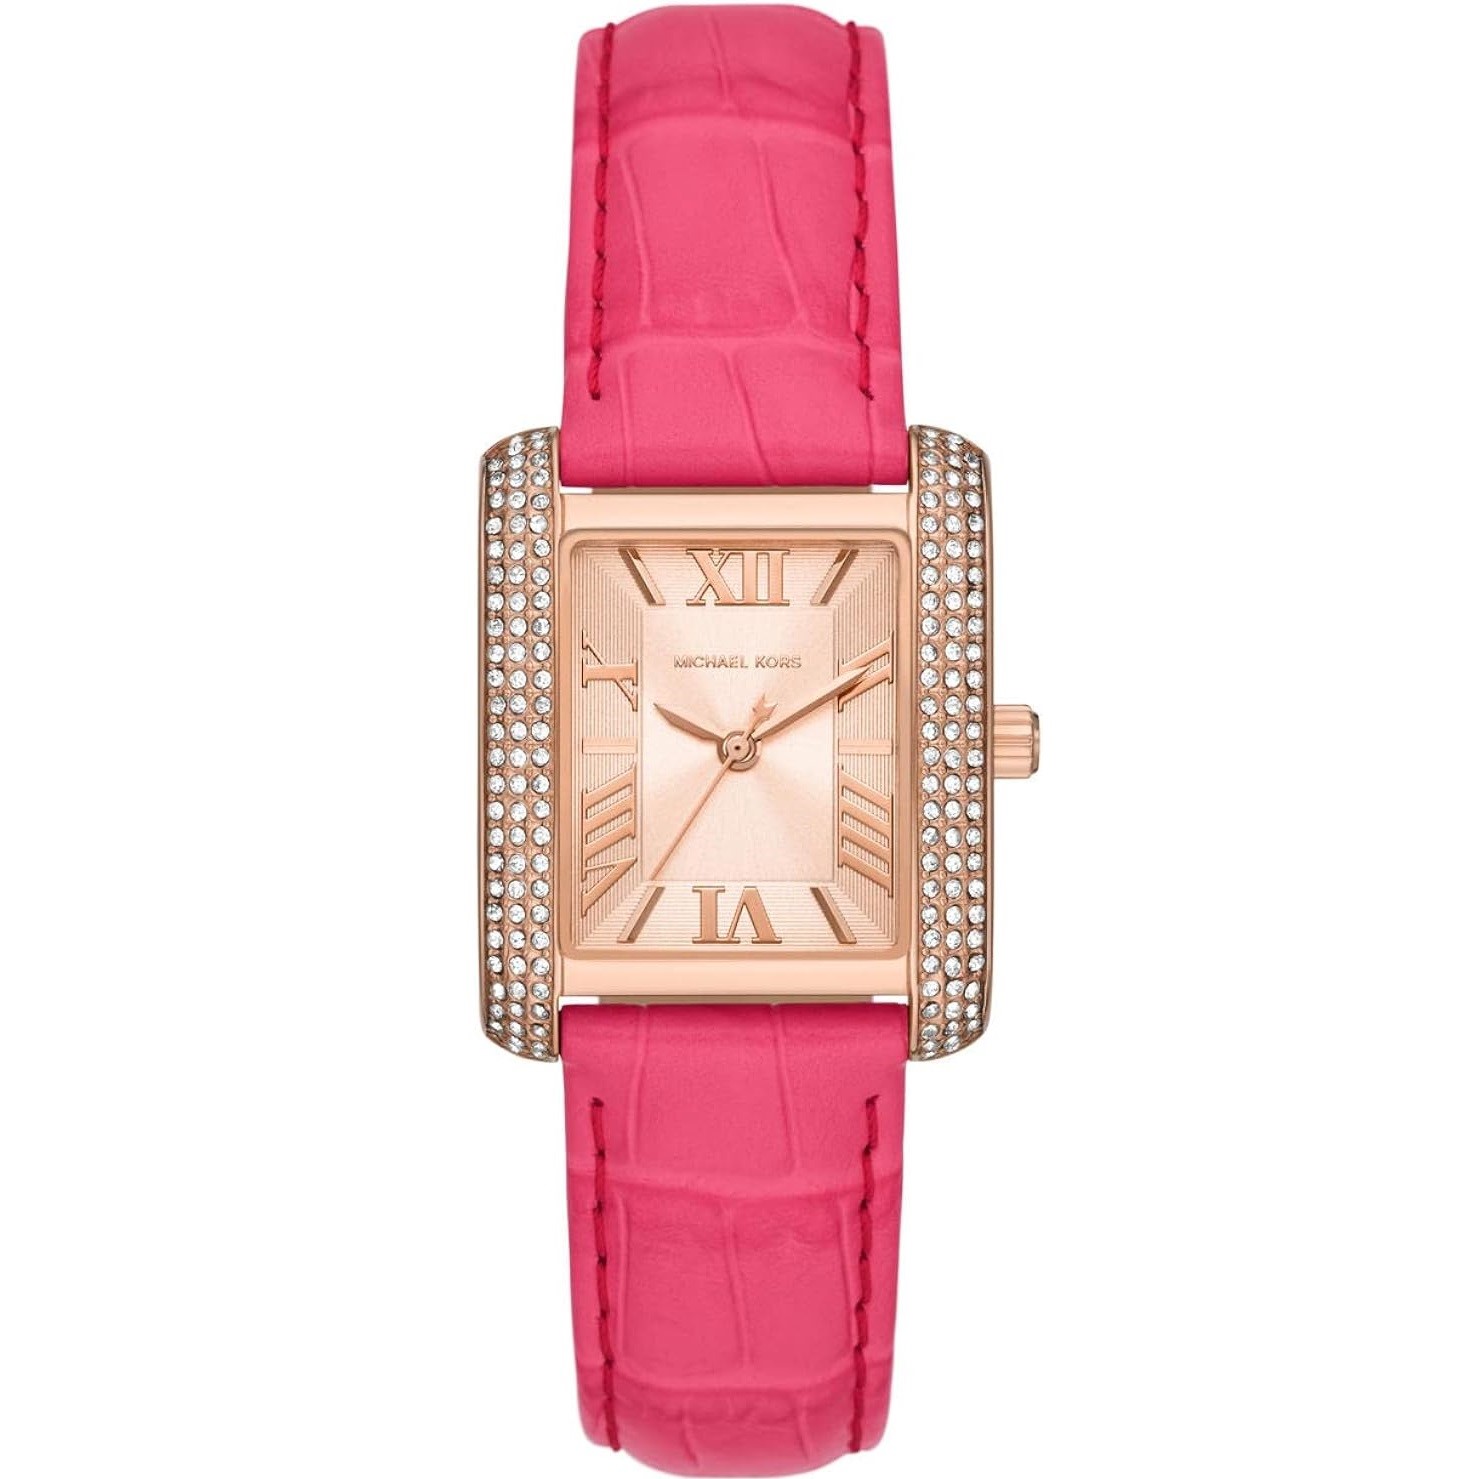 ĐỒNG HỒ ĐEO TAY DÂY DA MK NỮ MICHAEL KORS EMERY PAVÉ ROSE GOLD-TONE AND CROCODILE EMBOSSED LEATHER WATCH MK2984 2